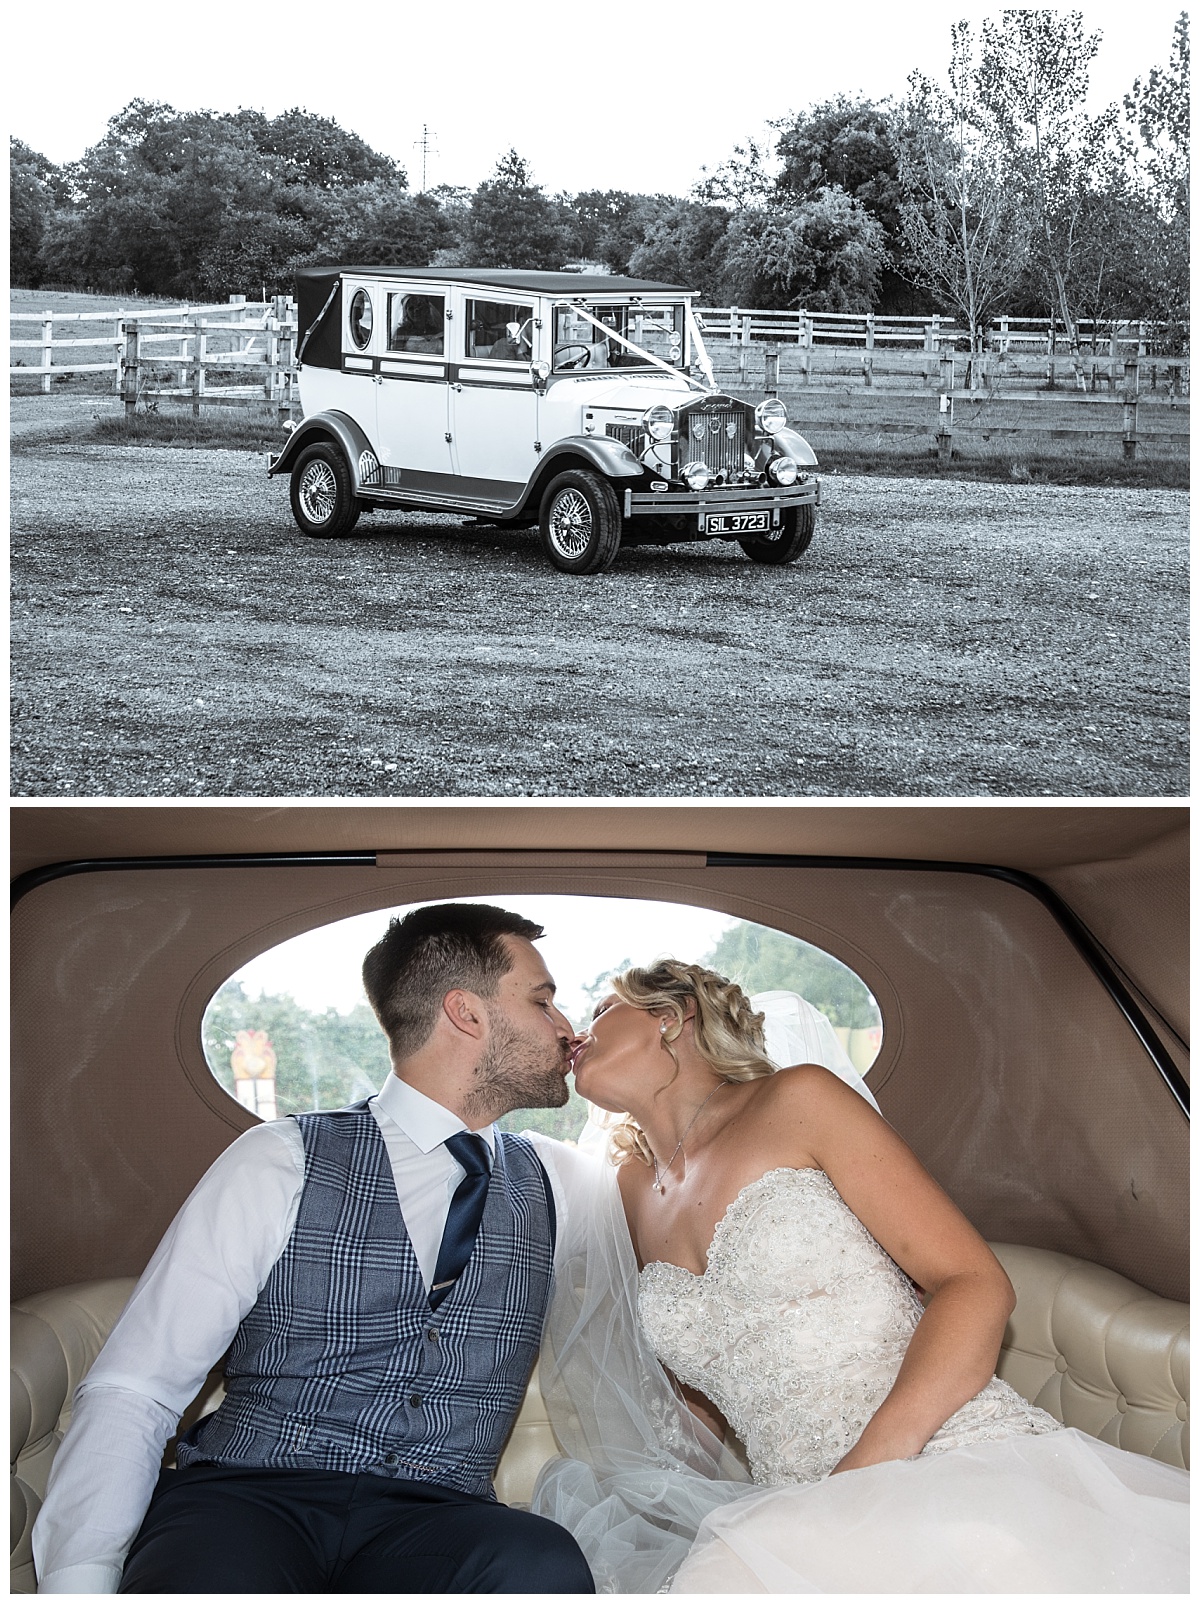 Wedding Photography Manchester - Brittany and Lee's Owen House Farm Wedding 48